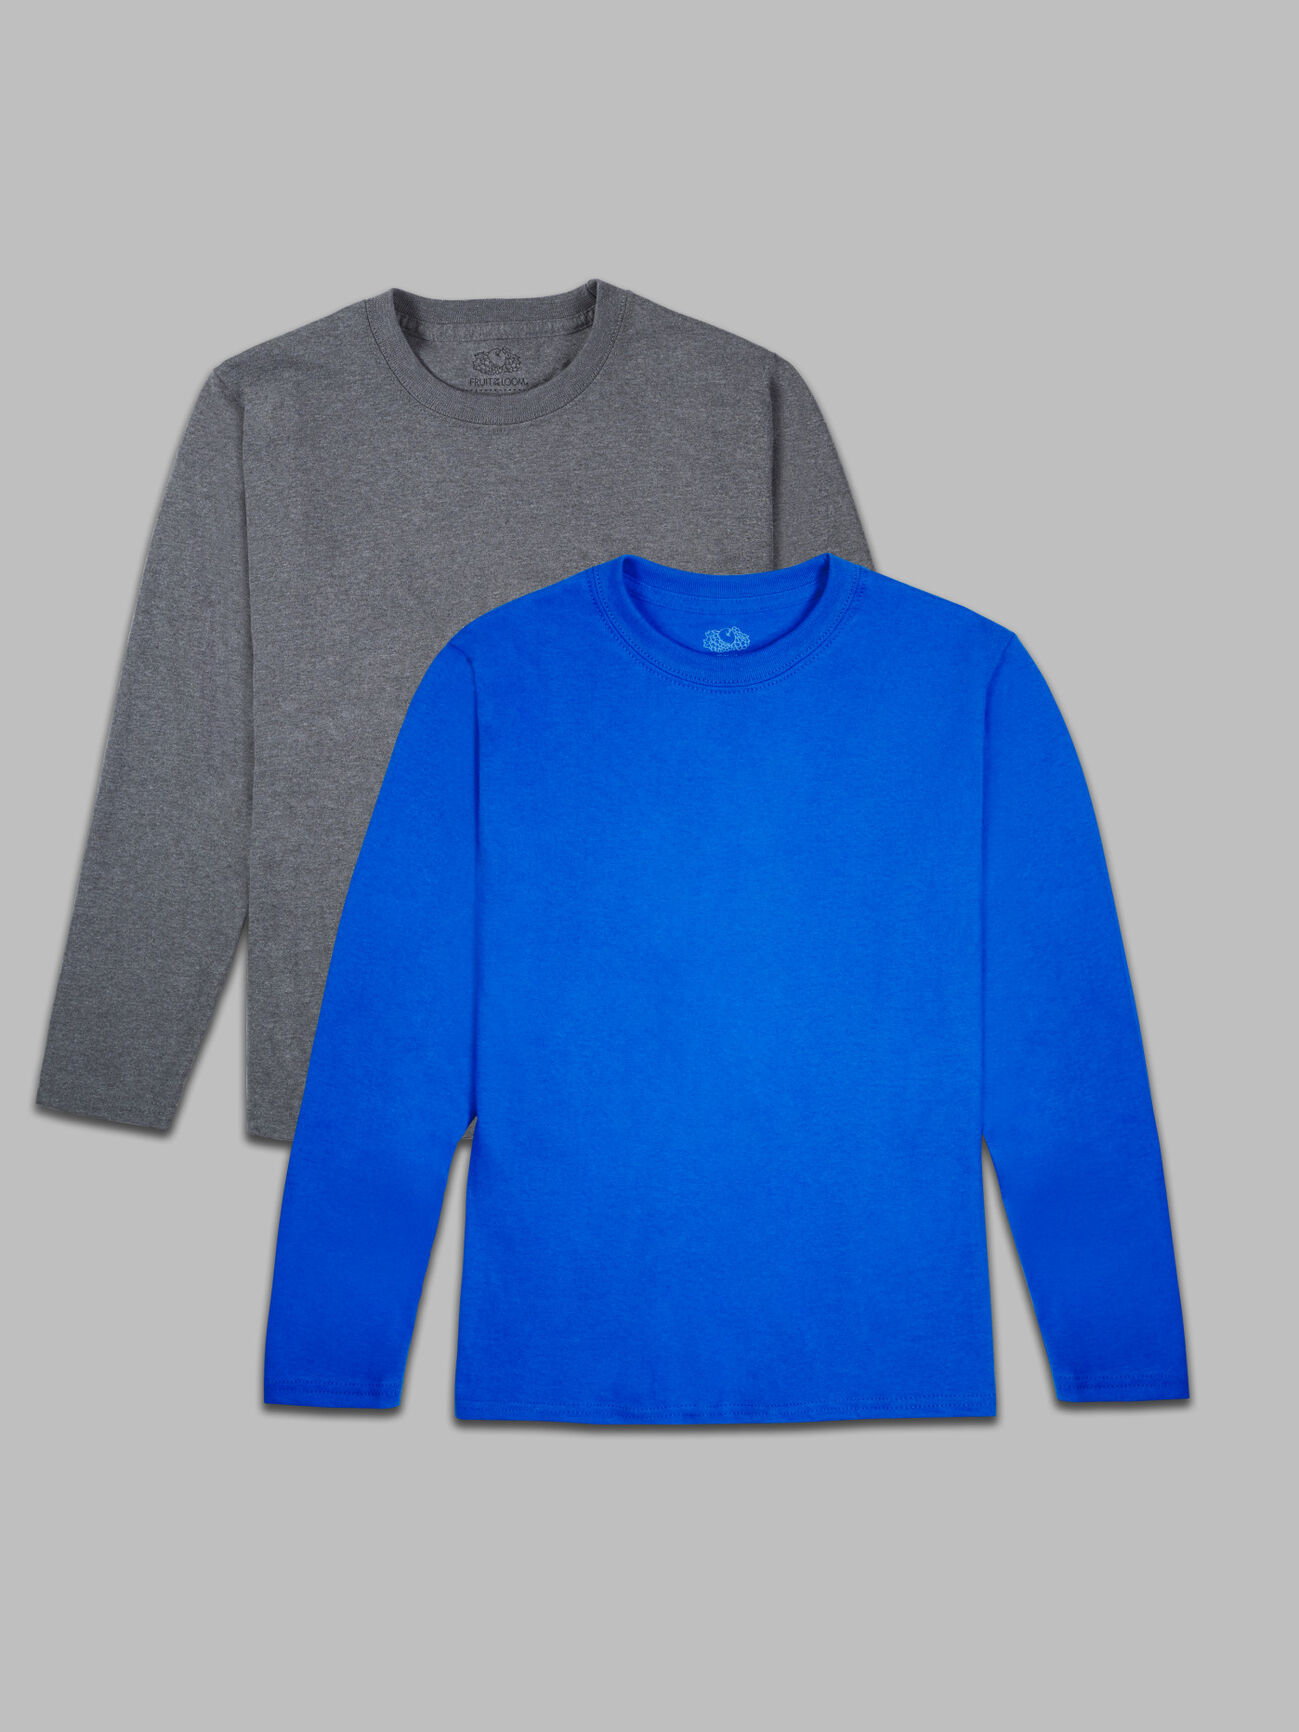 Boys' Super Soft Solid Multi-Color Long Sleeve T-Shirts